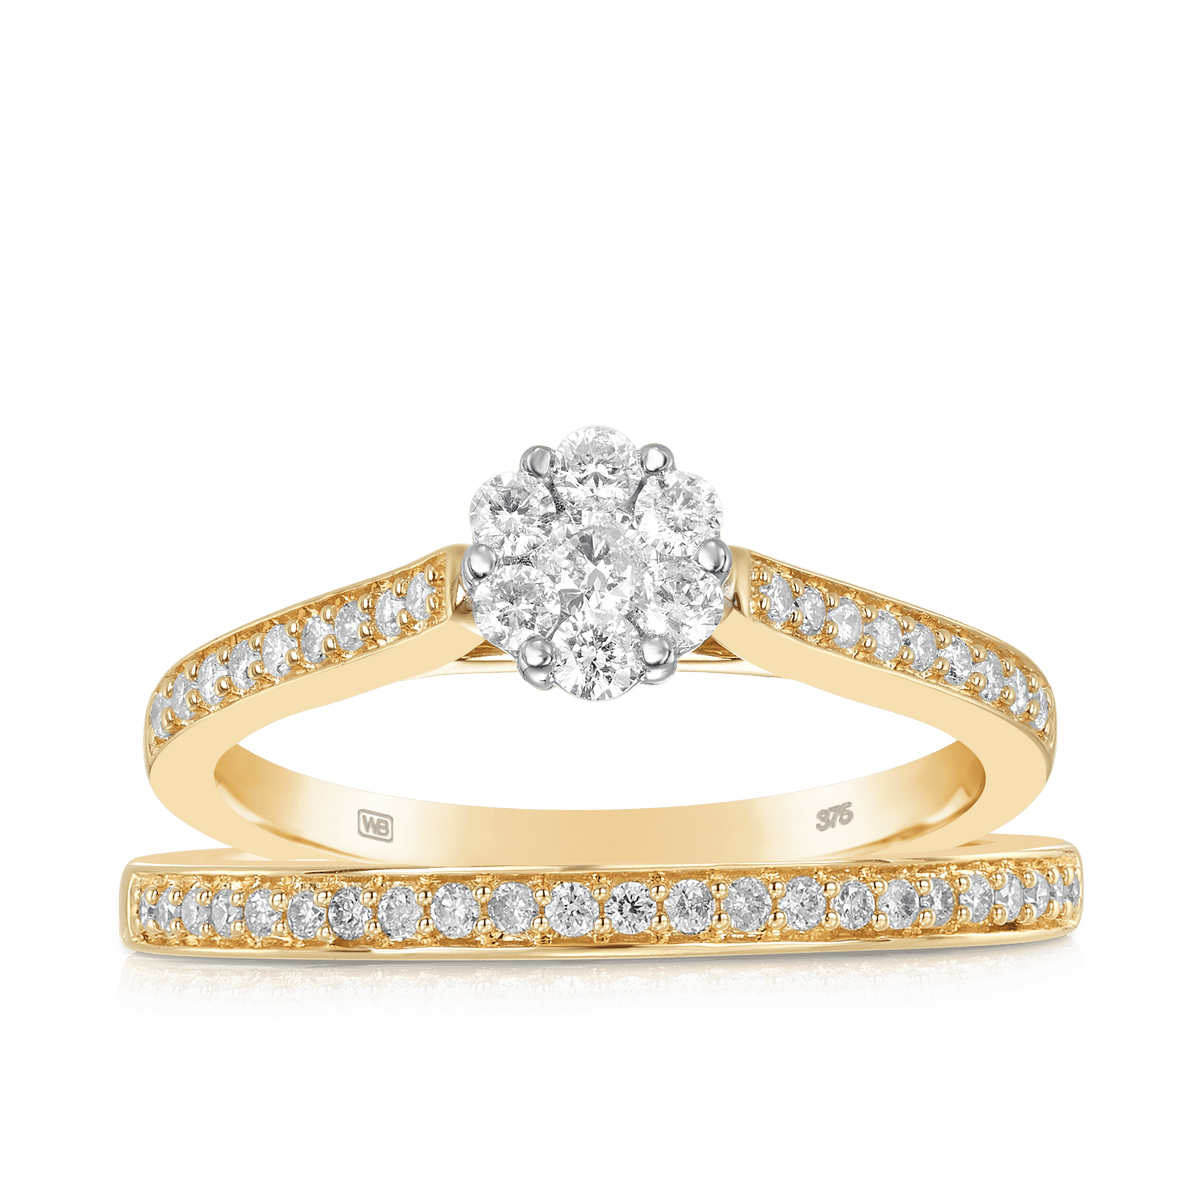 Round Brilliant Cut Diamond Engagement & Wedding Bridal Set Rings in 9ct Yellow Gold - Wallace Bishop